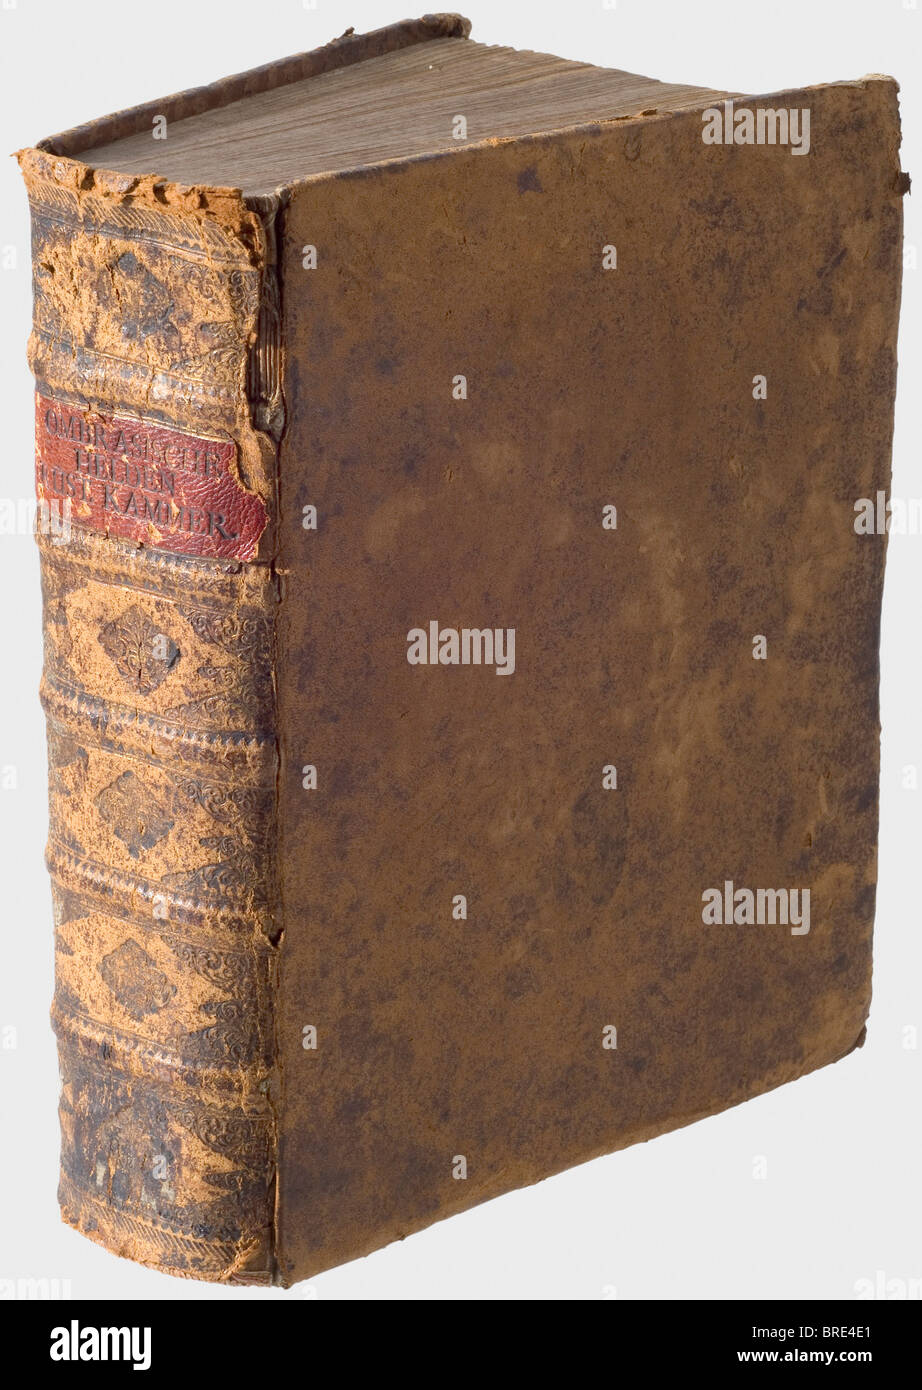 Jakob Schrenck von Notzing (died 1612), Ambrasische Helden-Rüstkammer, Nuremberg 1735 Reduced edition by Johann David Köhler, published by Christoph Weigel in Nuremberg. 26 x 21.5 cm. Leather cover with embossed spine. 448 p., comprehensive index. 125 copper engravings and a frontispiece after Giovanni Battista Fontana's drawings (1541 - 1587). The preliminary copper portraits are succeeded by four-page biographies. The original edition was published in Innsbruck in 1601 and is considered to be the first illustrated and printed museum catalogue of the world. In, Stock Photo